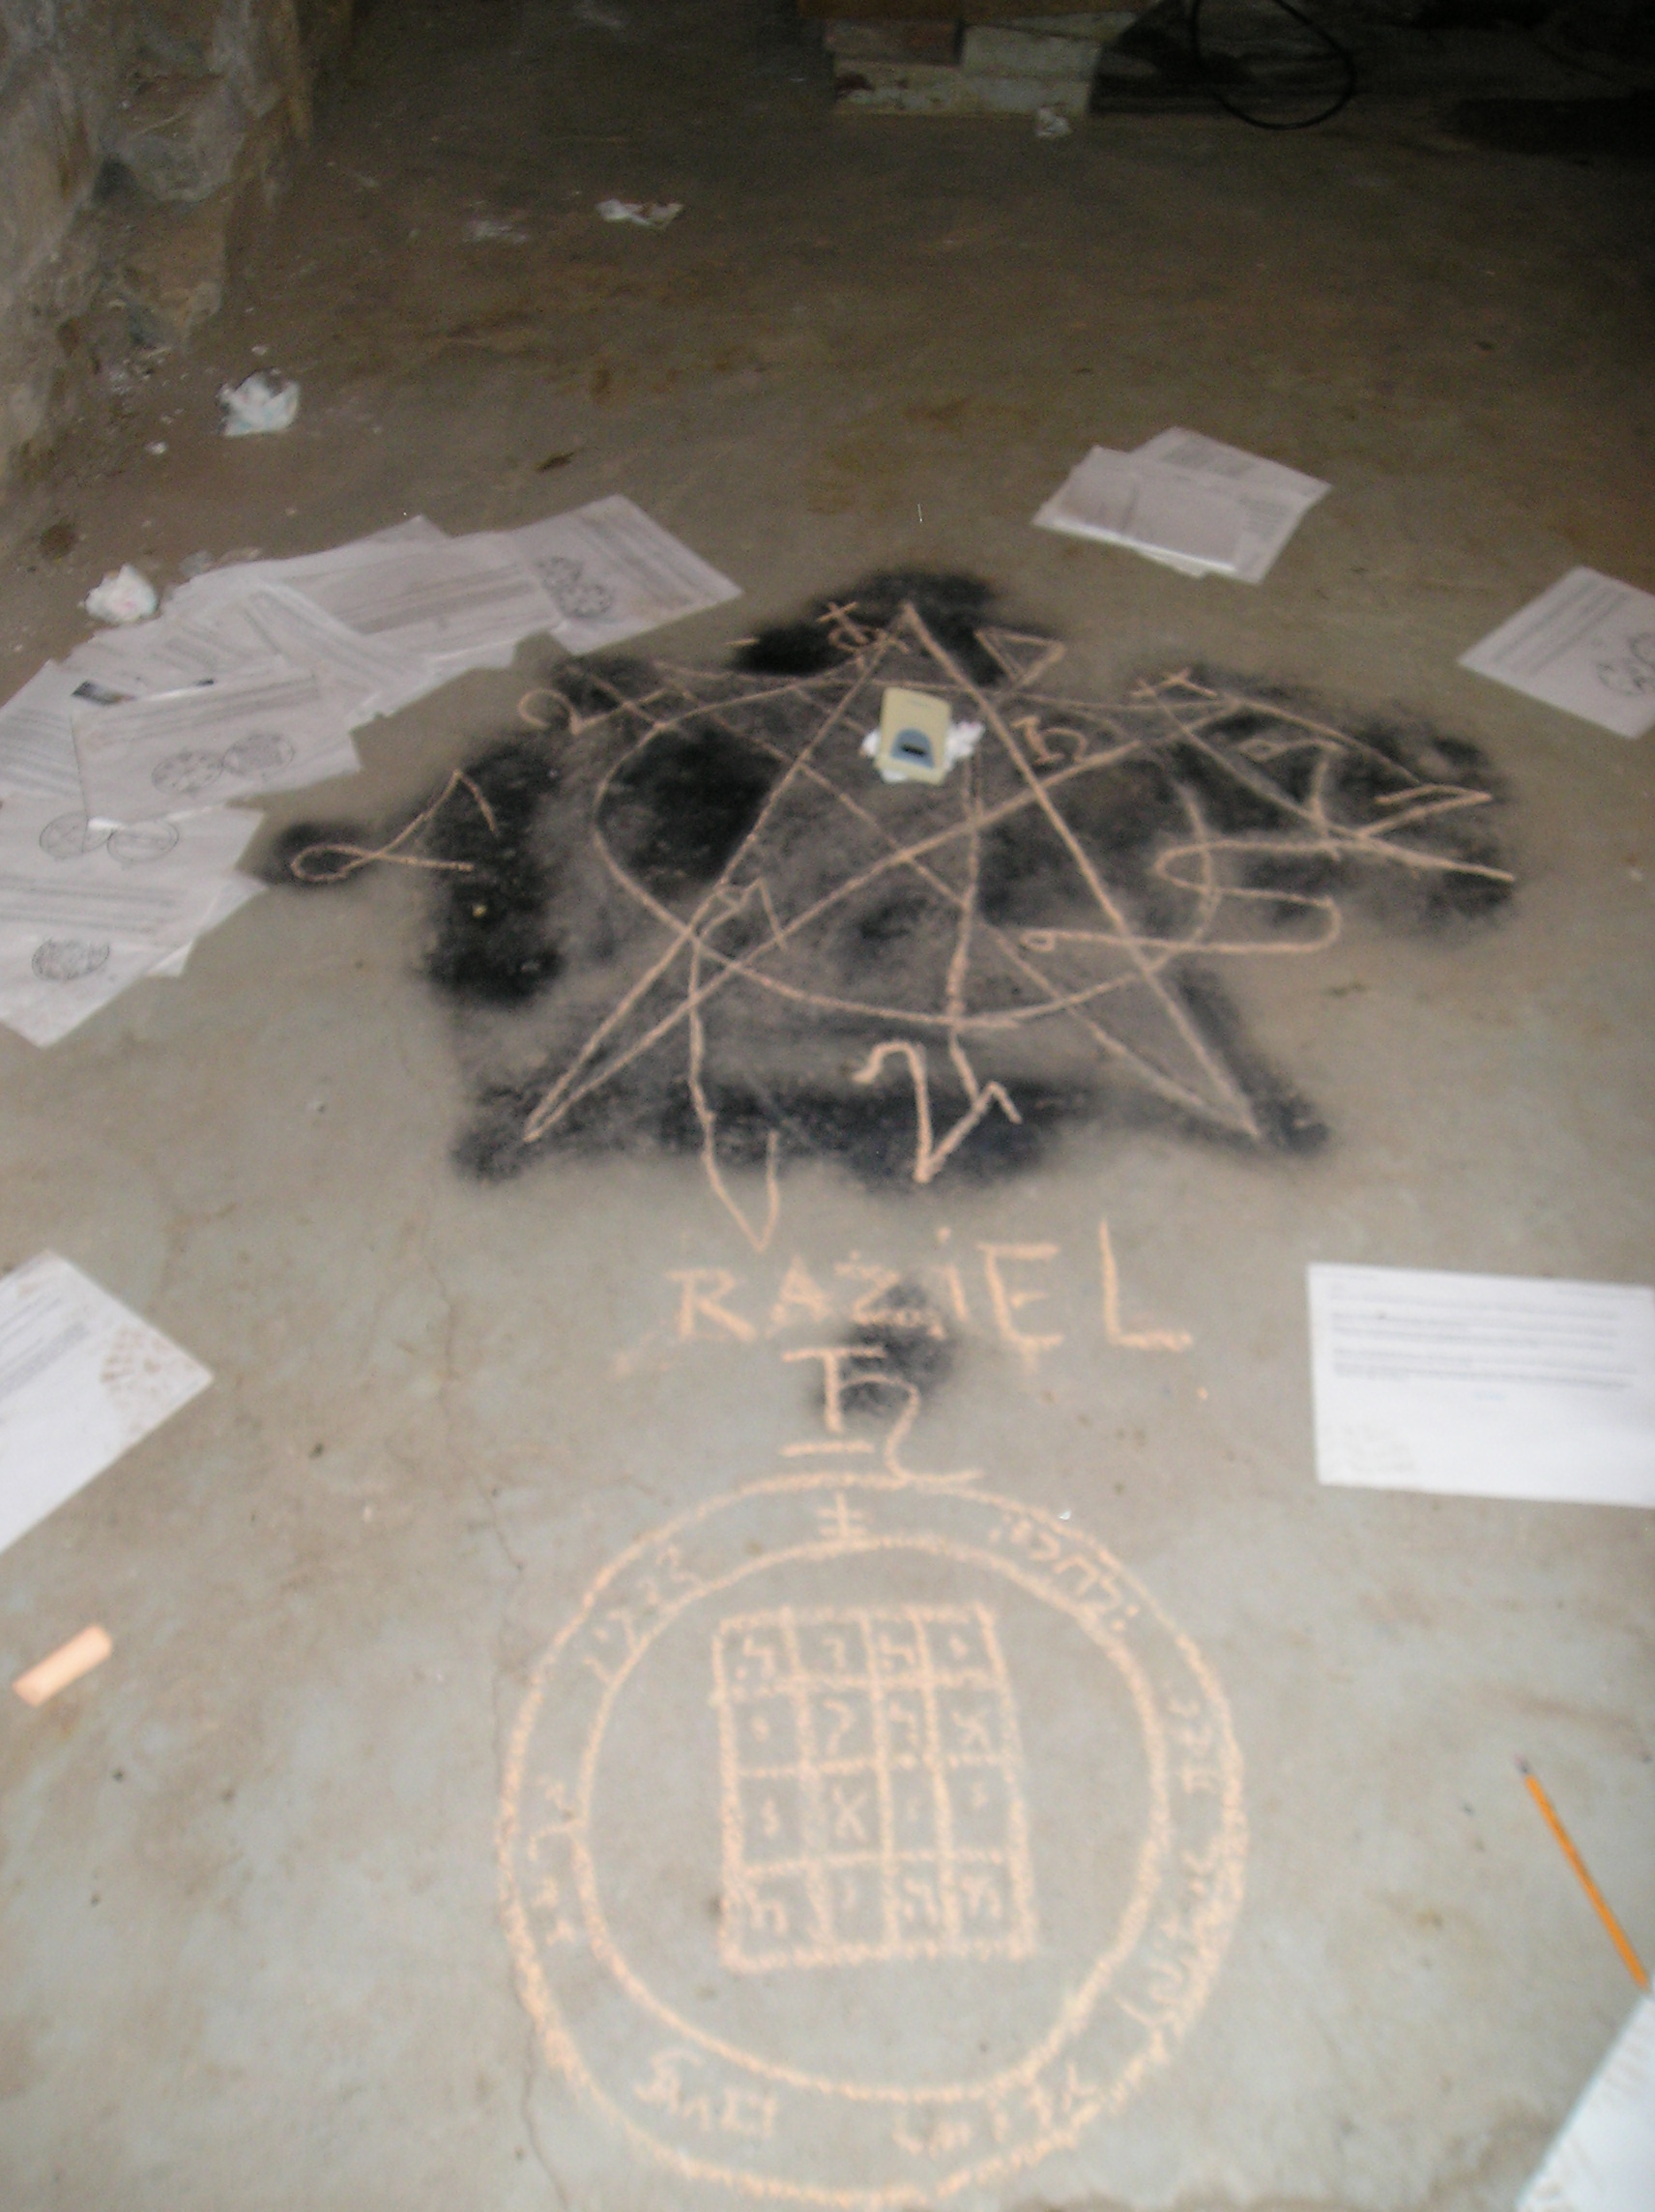  A demonologist’s attempt at retracing the pentagram drawn on the floor of the basement by a previous tenant, in order to determine what spells had been cast, and then adding some protective sigils. 